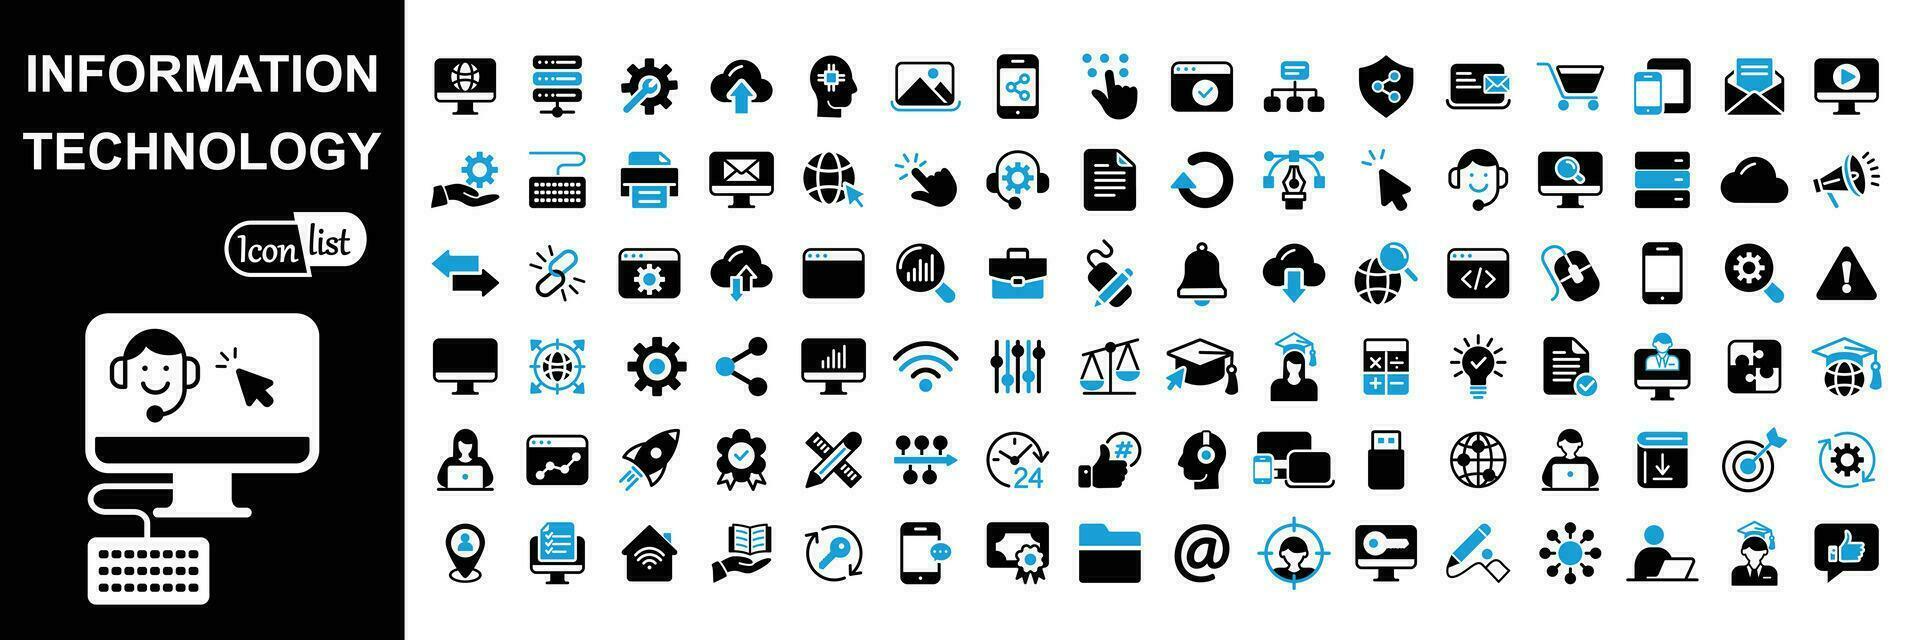 Information technology icon set with IT network system, global internet, data center, communication .Vector illustration. vector